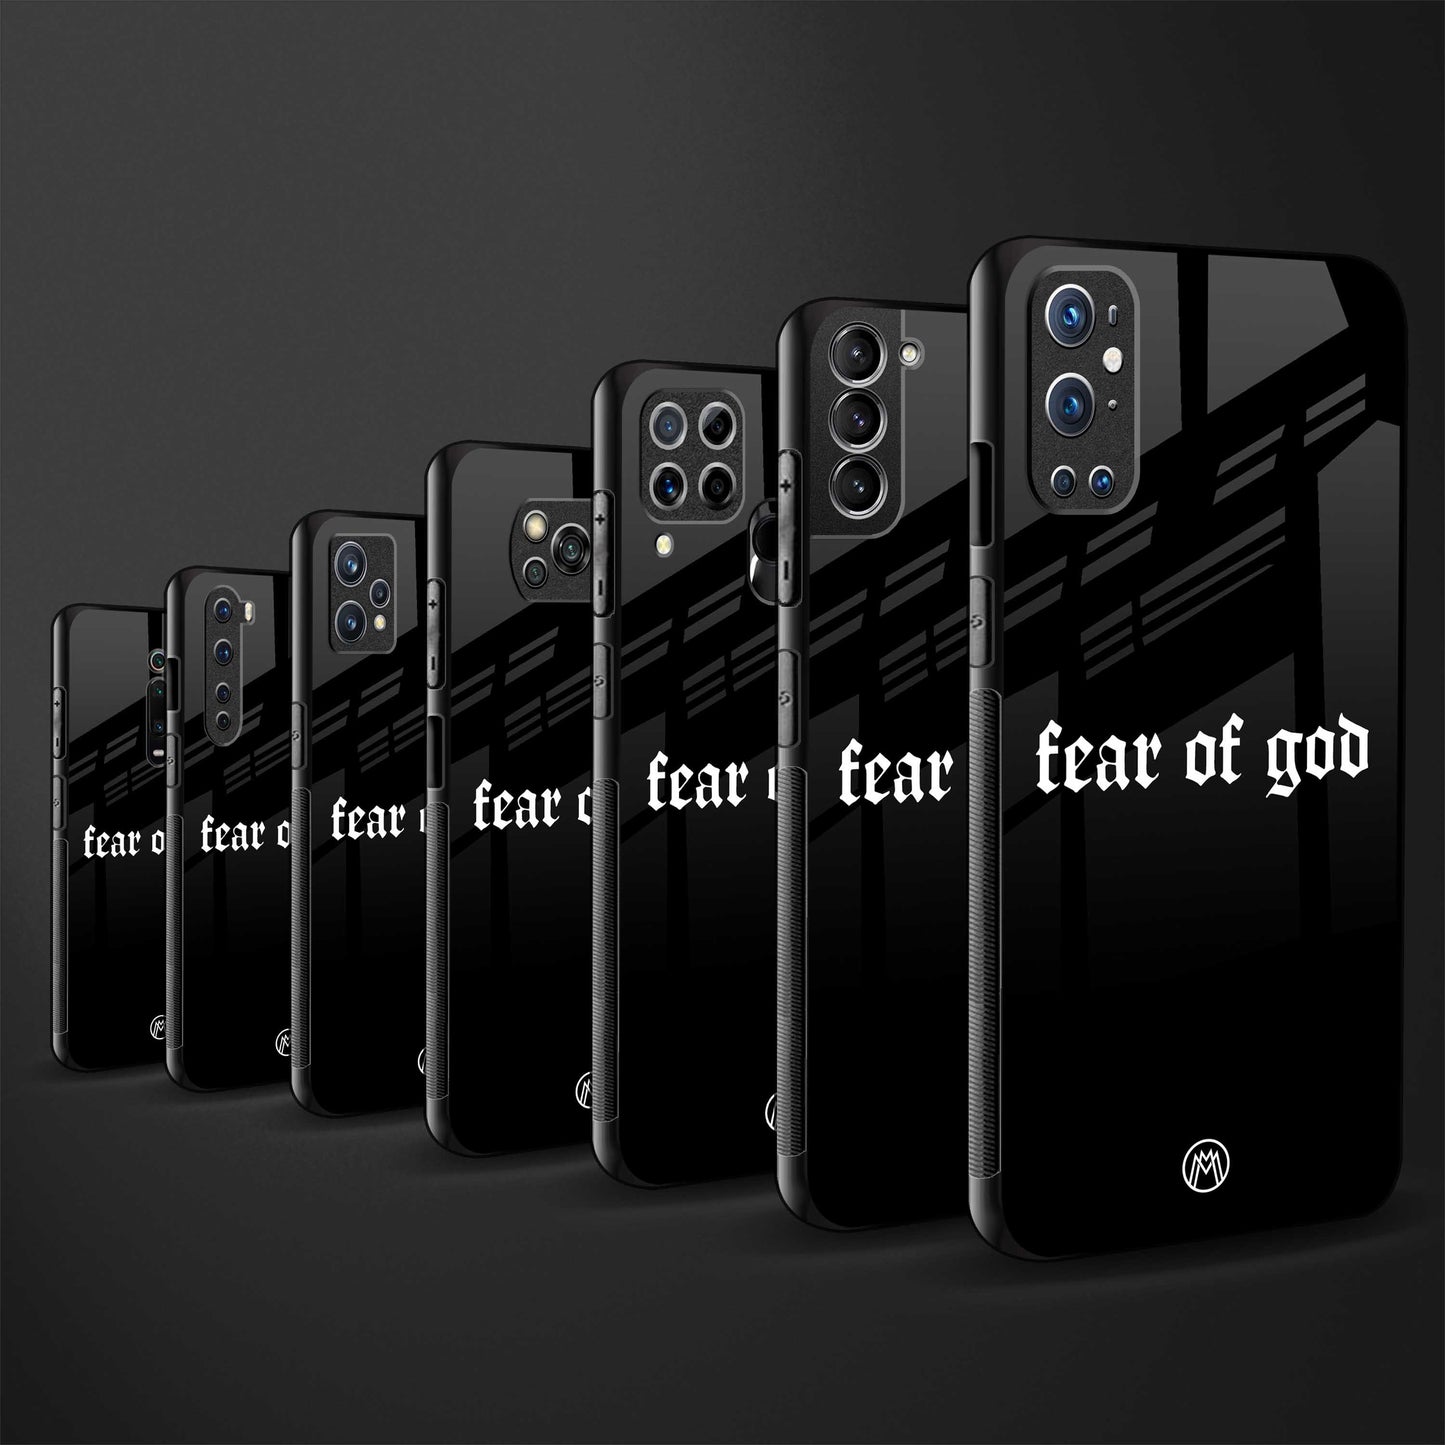 fear of god phone cover for redmi 9a sport